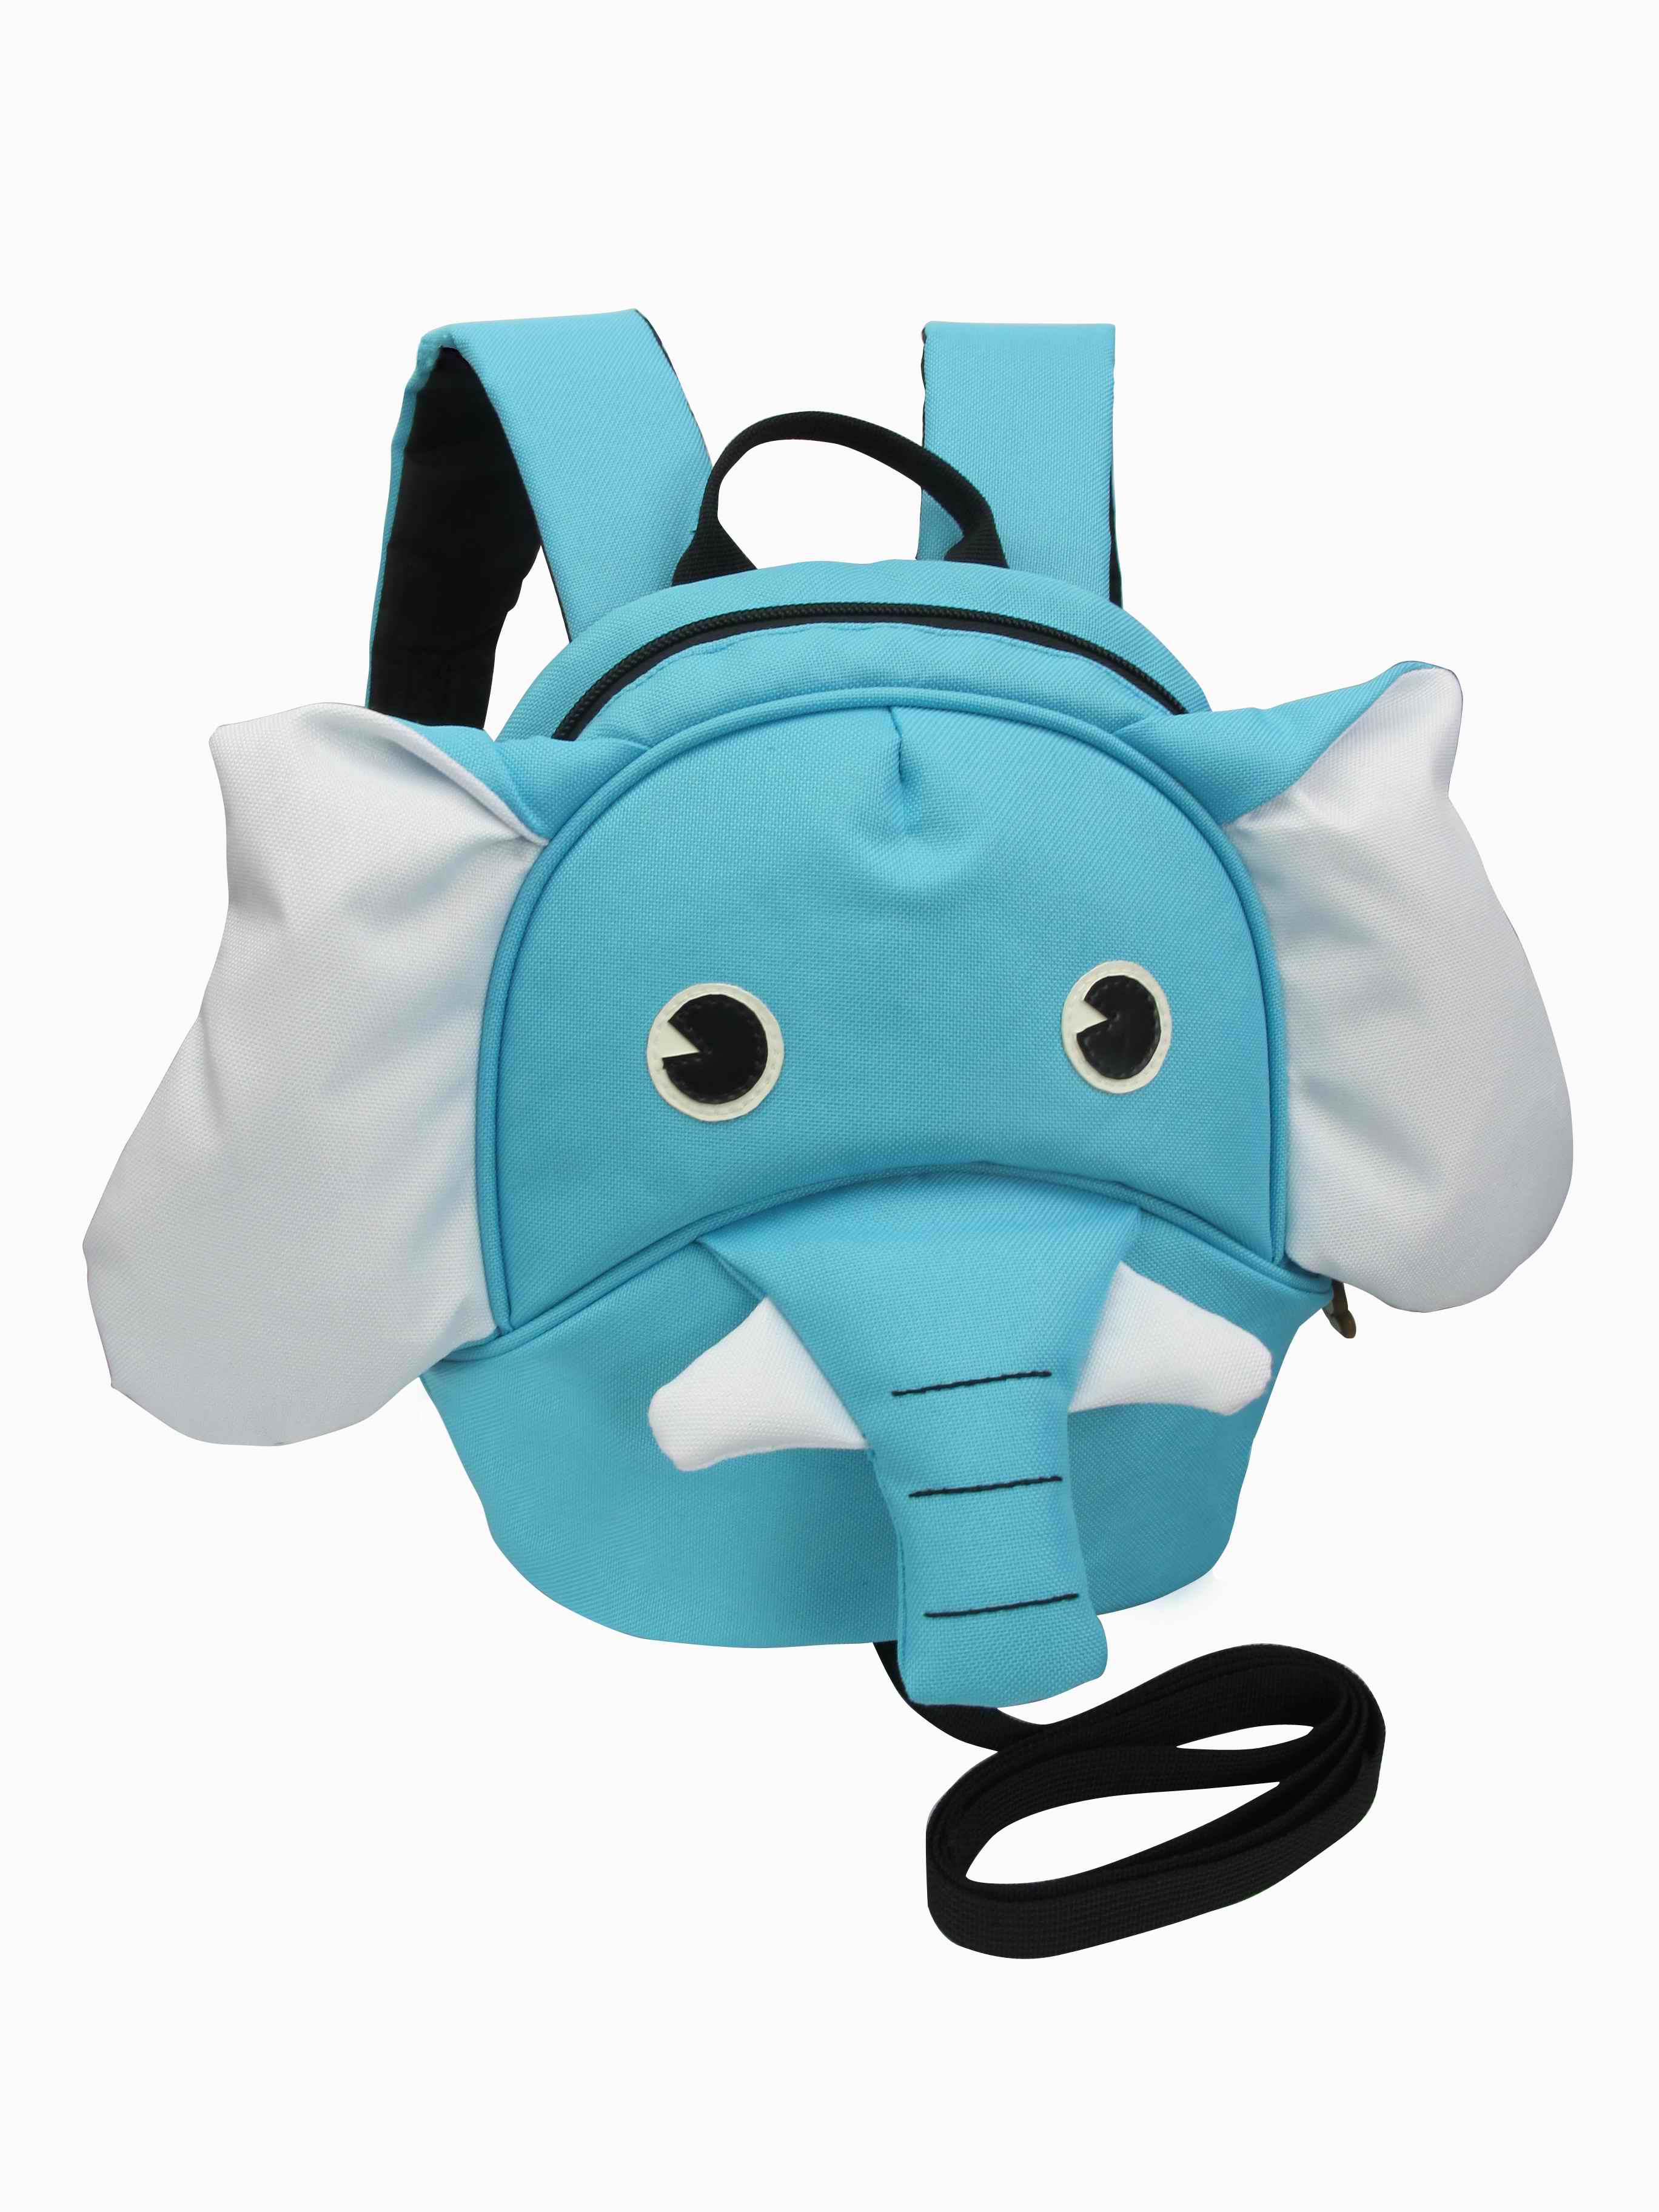 animal face backpack